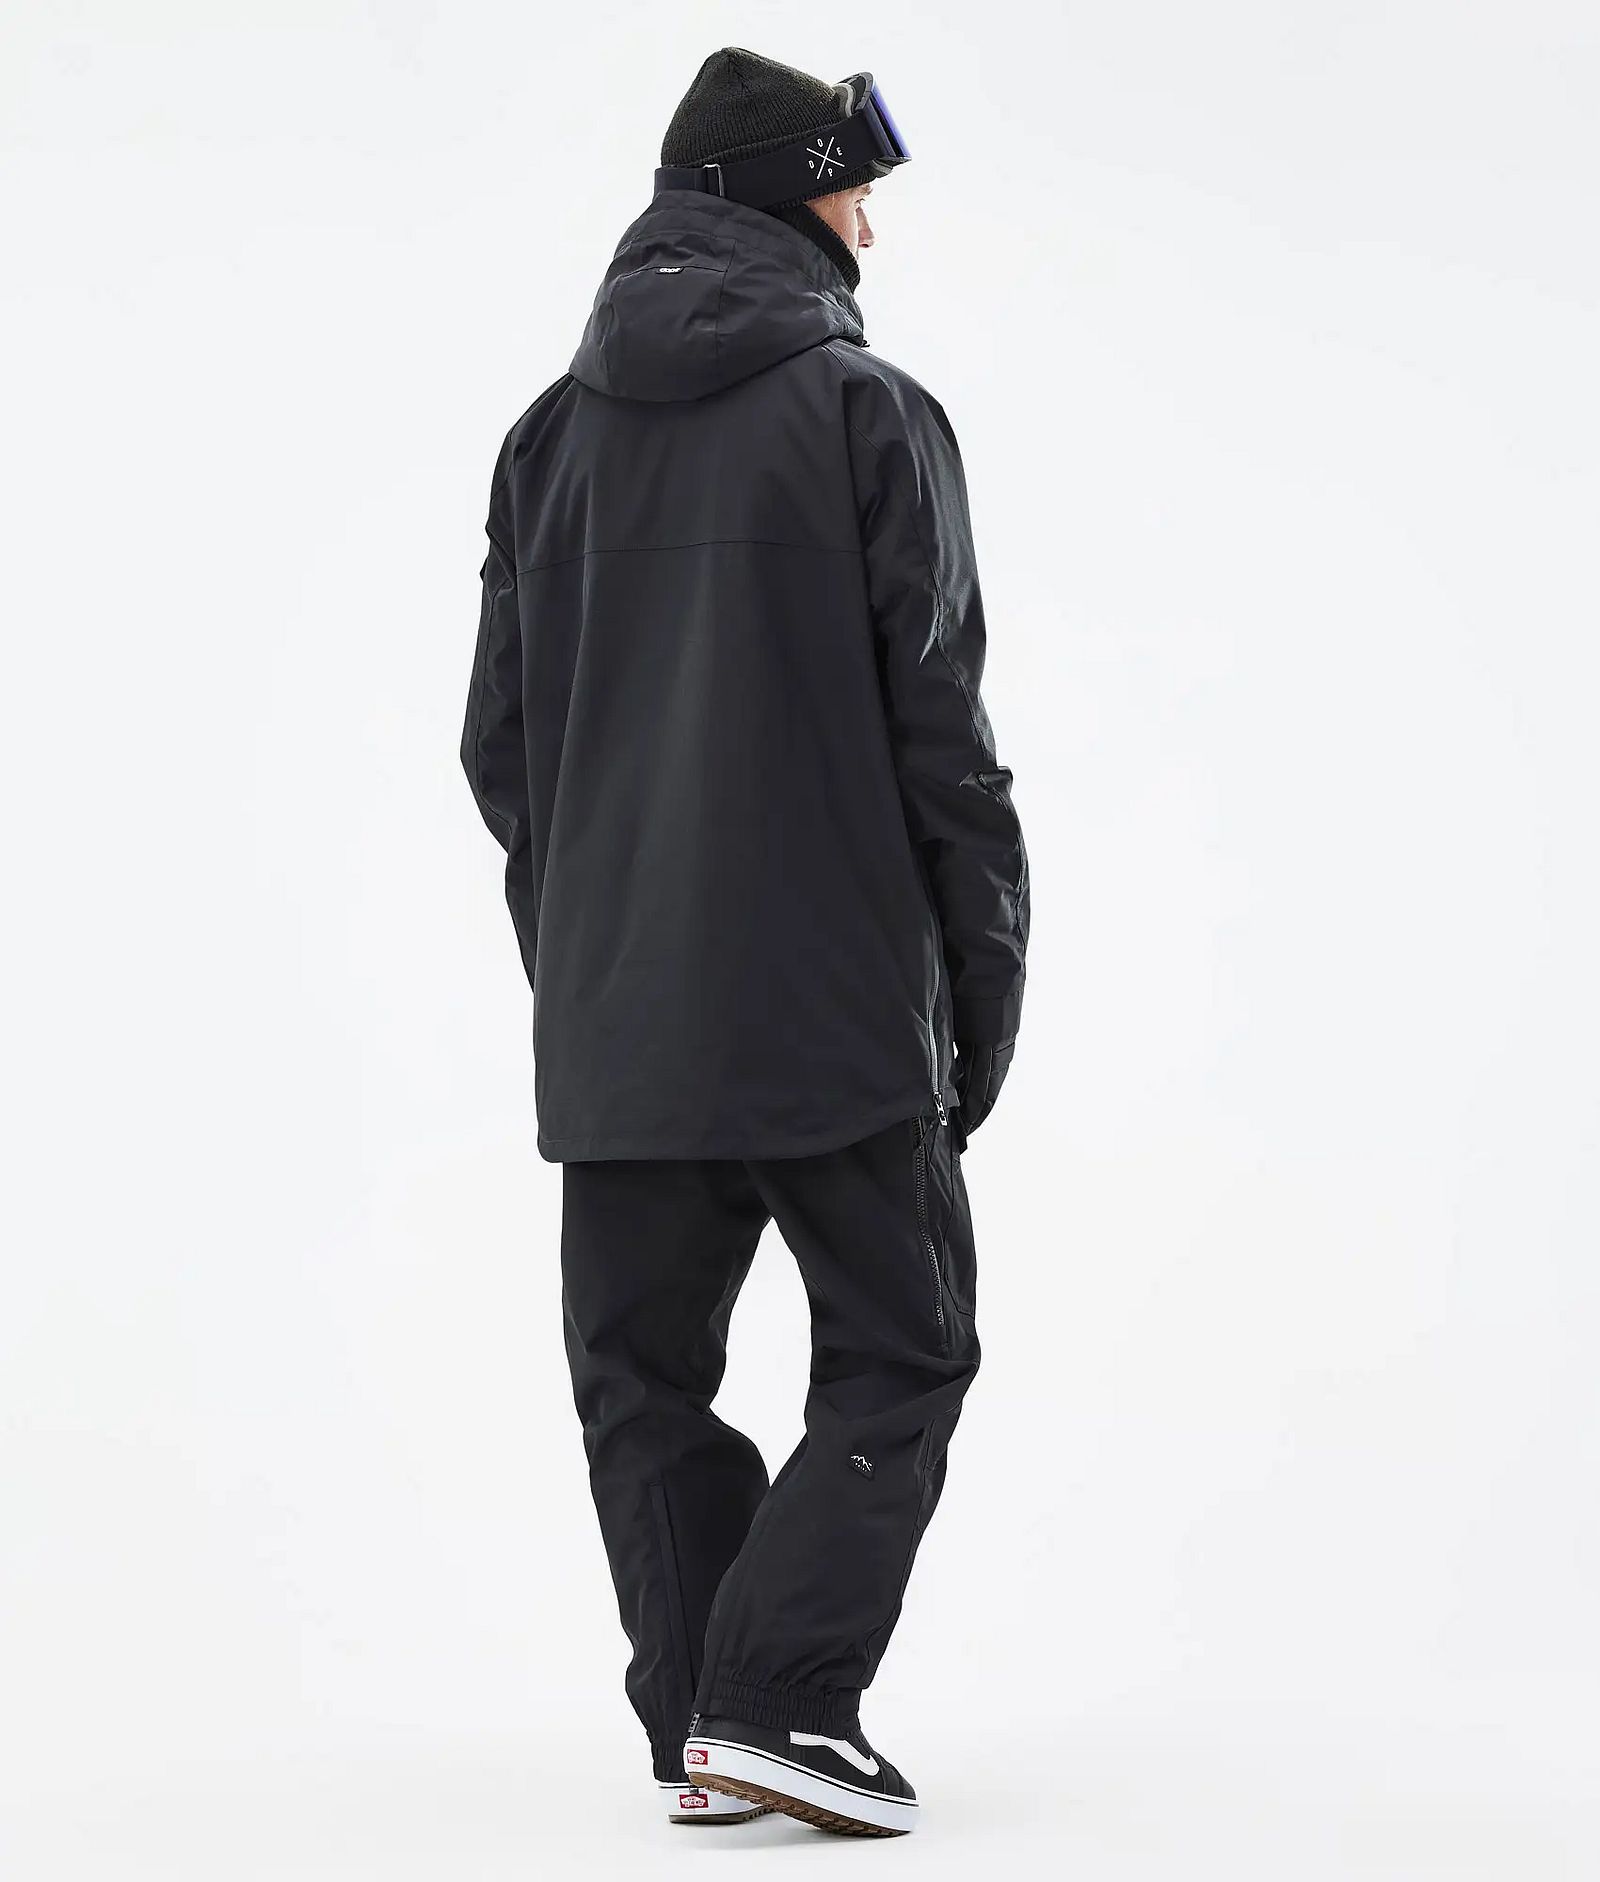 Akin Outfit Snowboard Homme Black